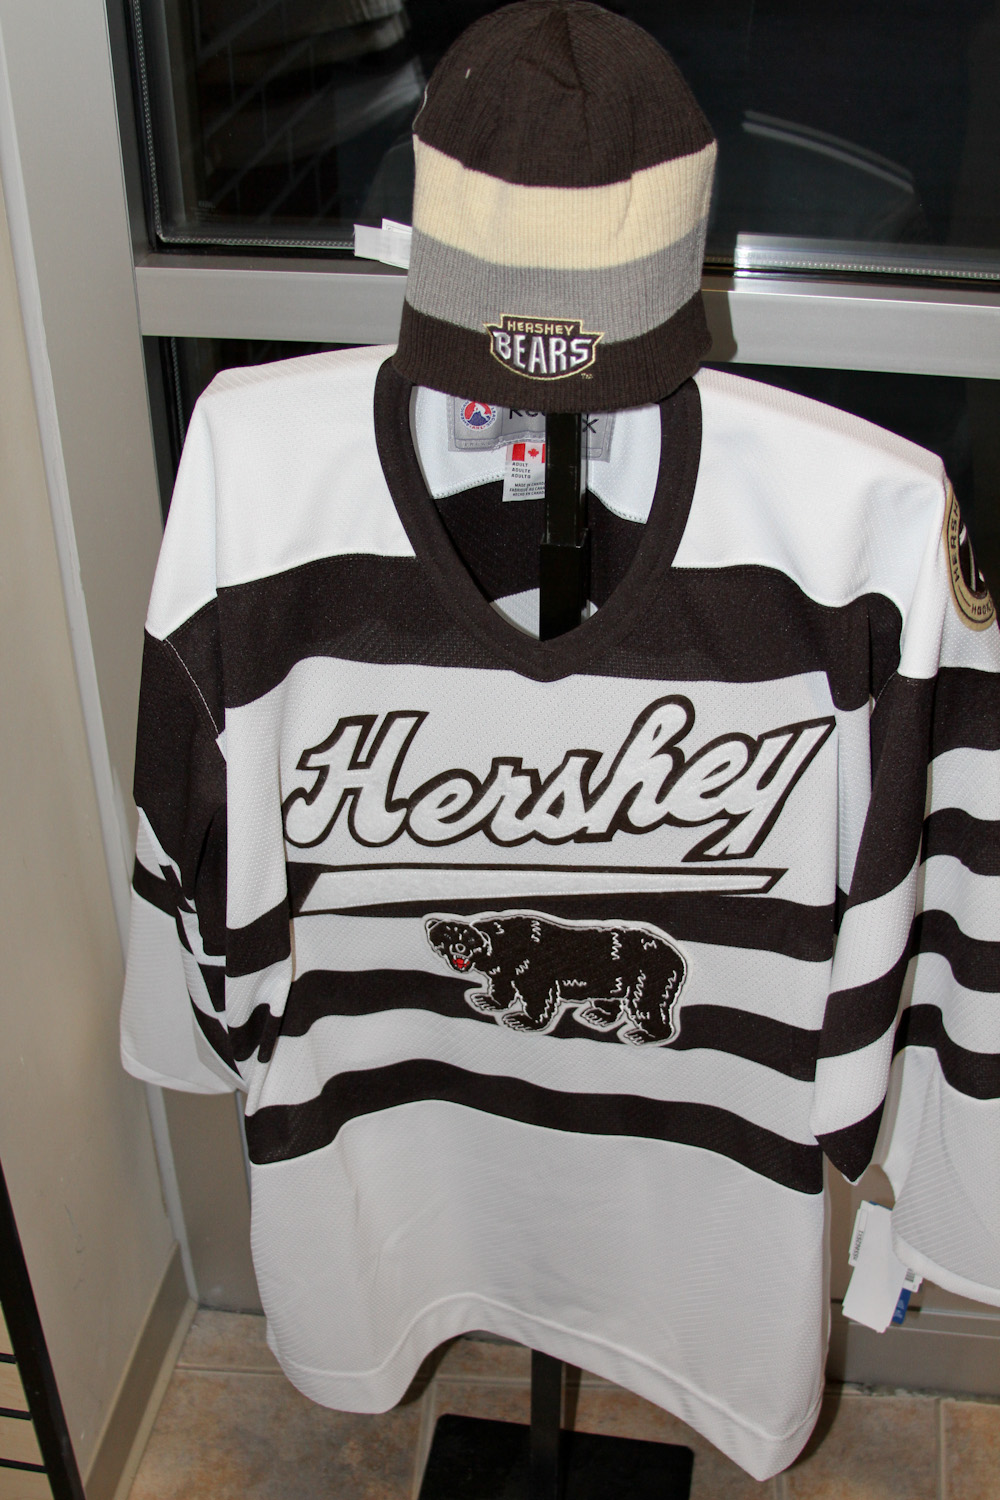 A Look the Hershey Bears' Outdoor Classic Jerseys